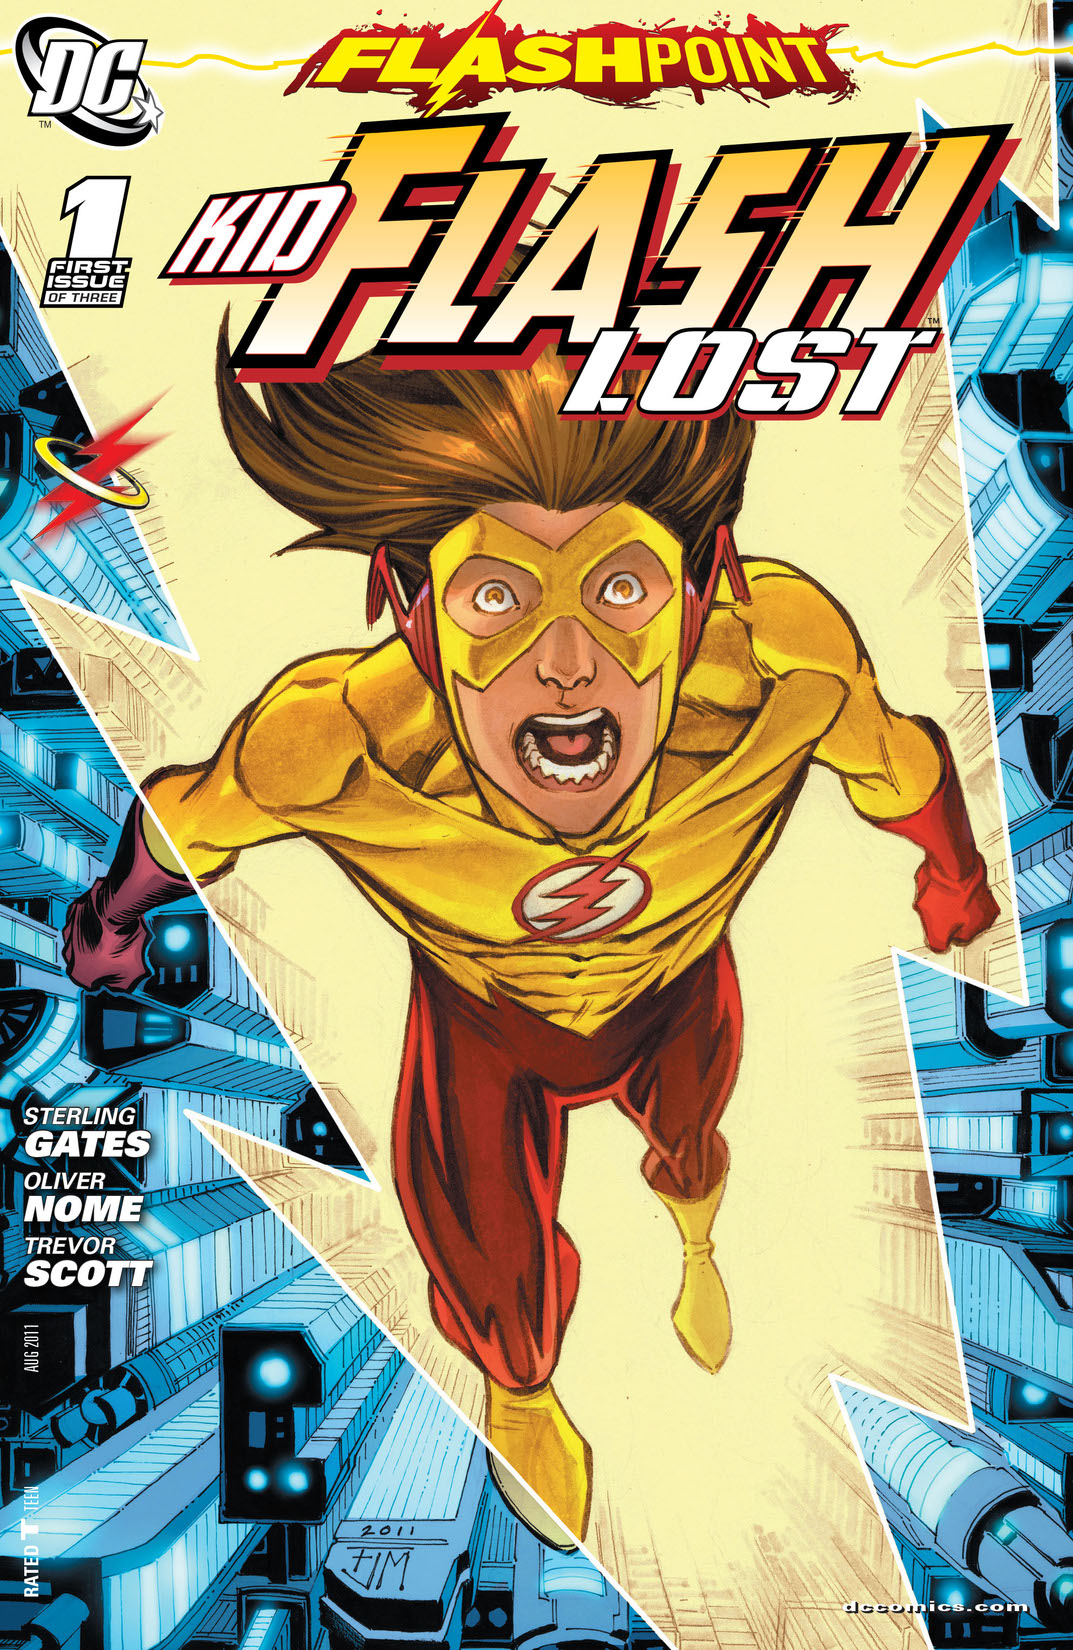 Flashpoint: Kid Flash Lost #1 preview images